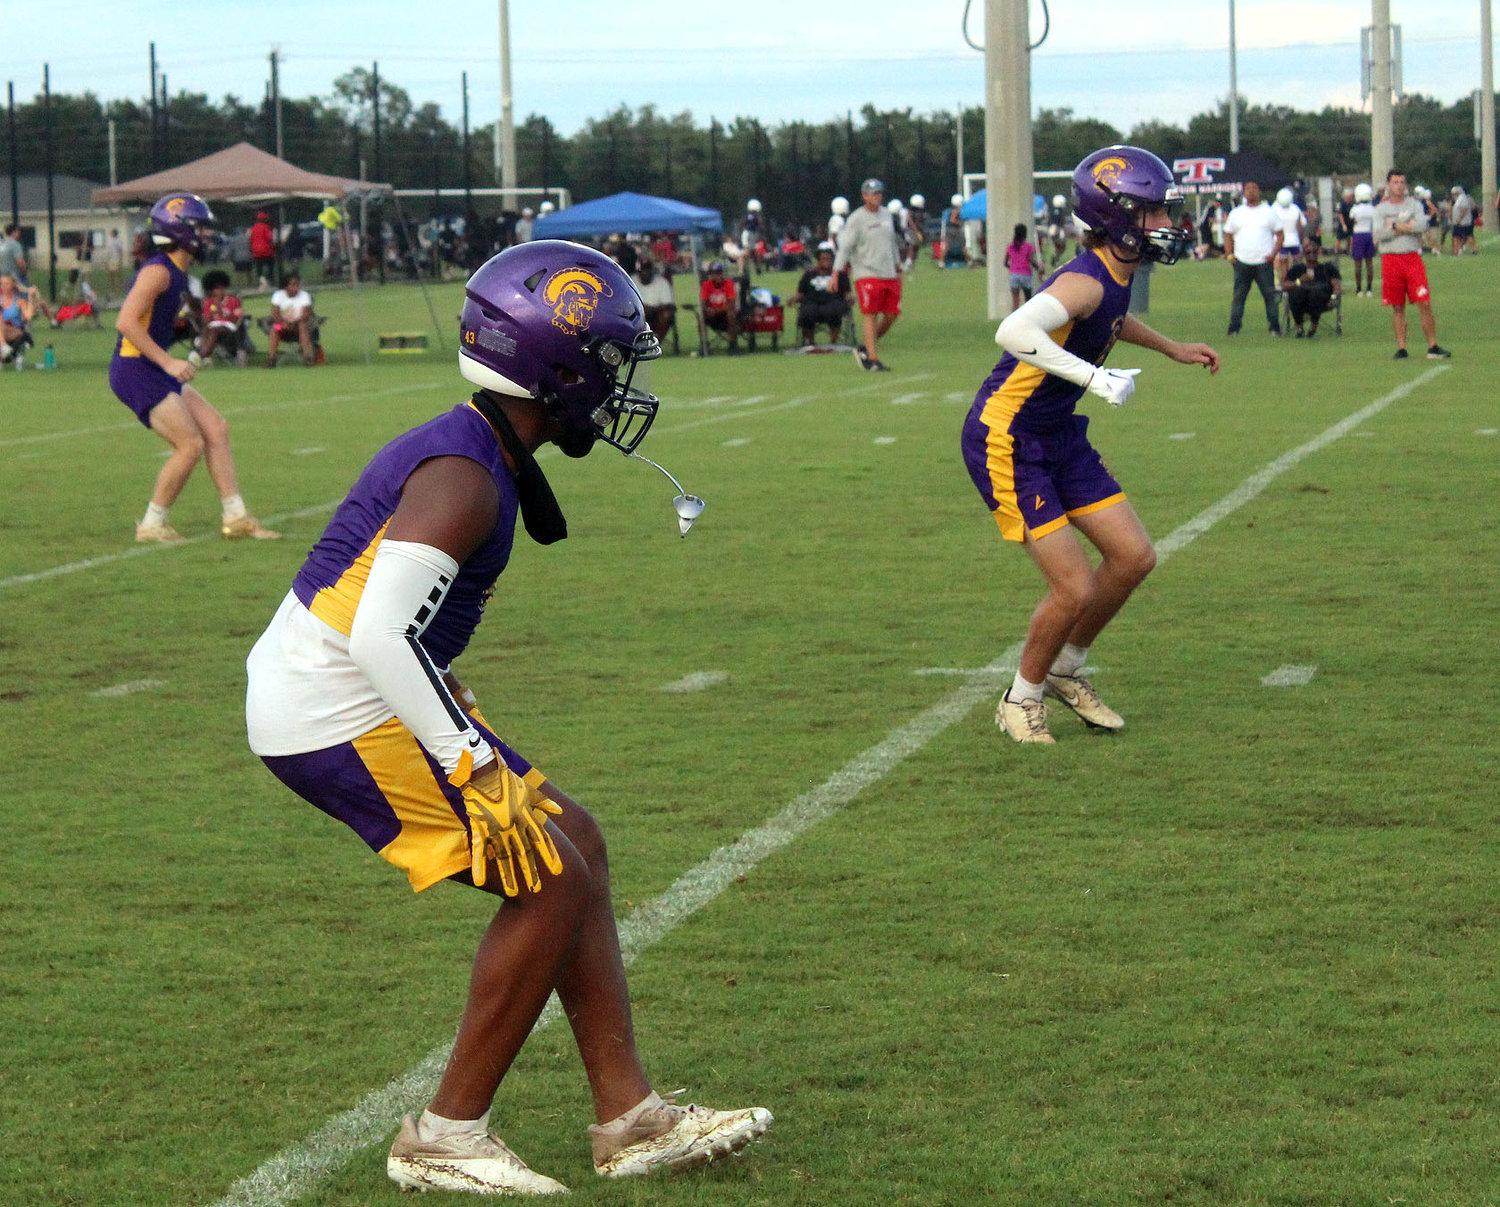 The Daphne Trojans brought a pair of teams to the Foley Sports Tourism Complex for the annual 7-on-7 Showdown. Pictured is the Daphne 2 team in action against the Hewitt-Trussville Huskies on day one of competition June 29.